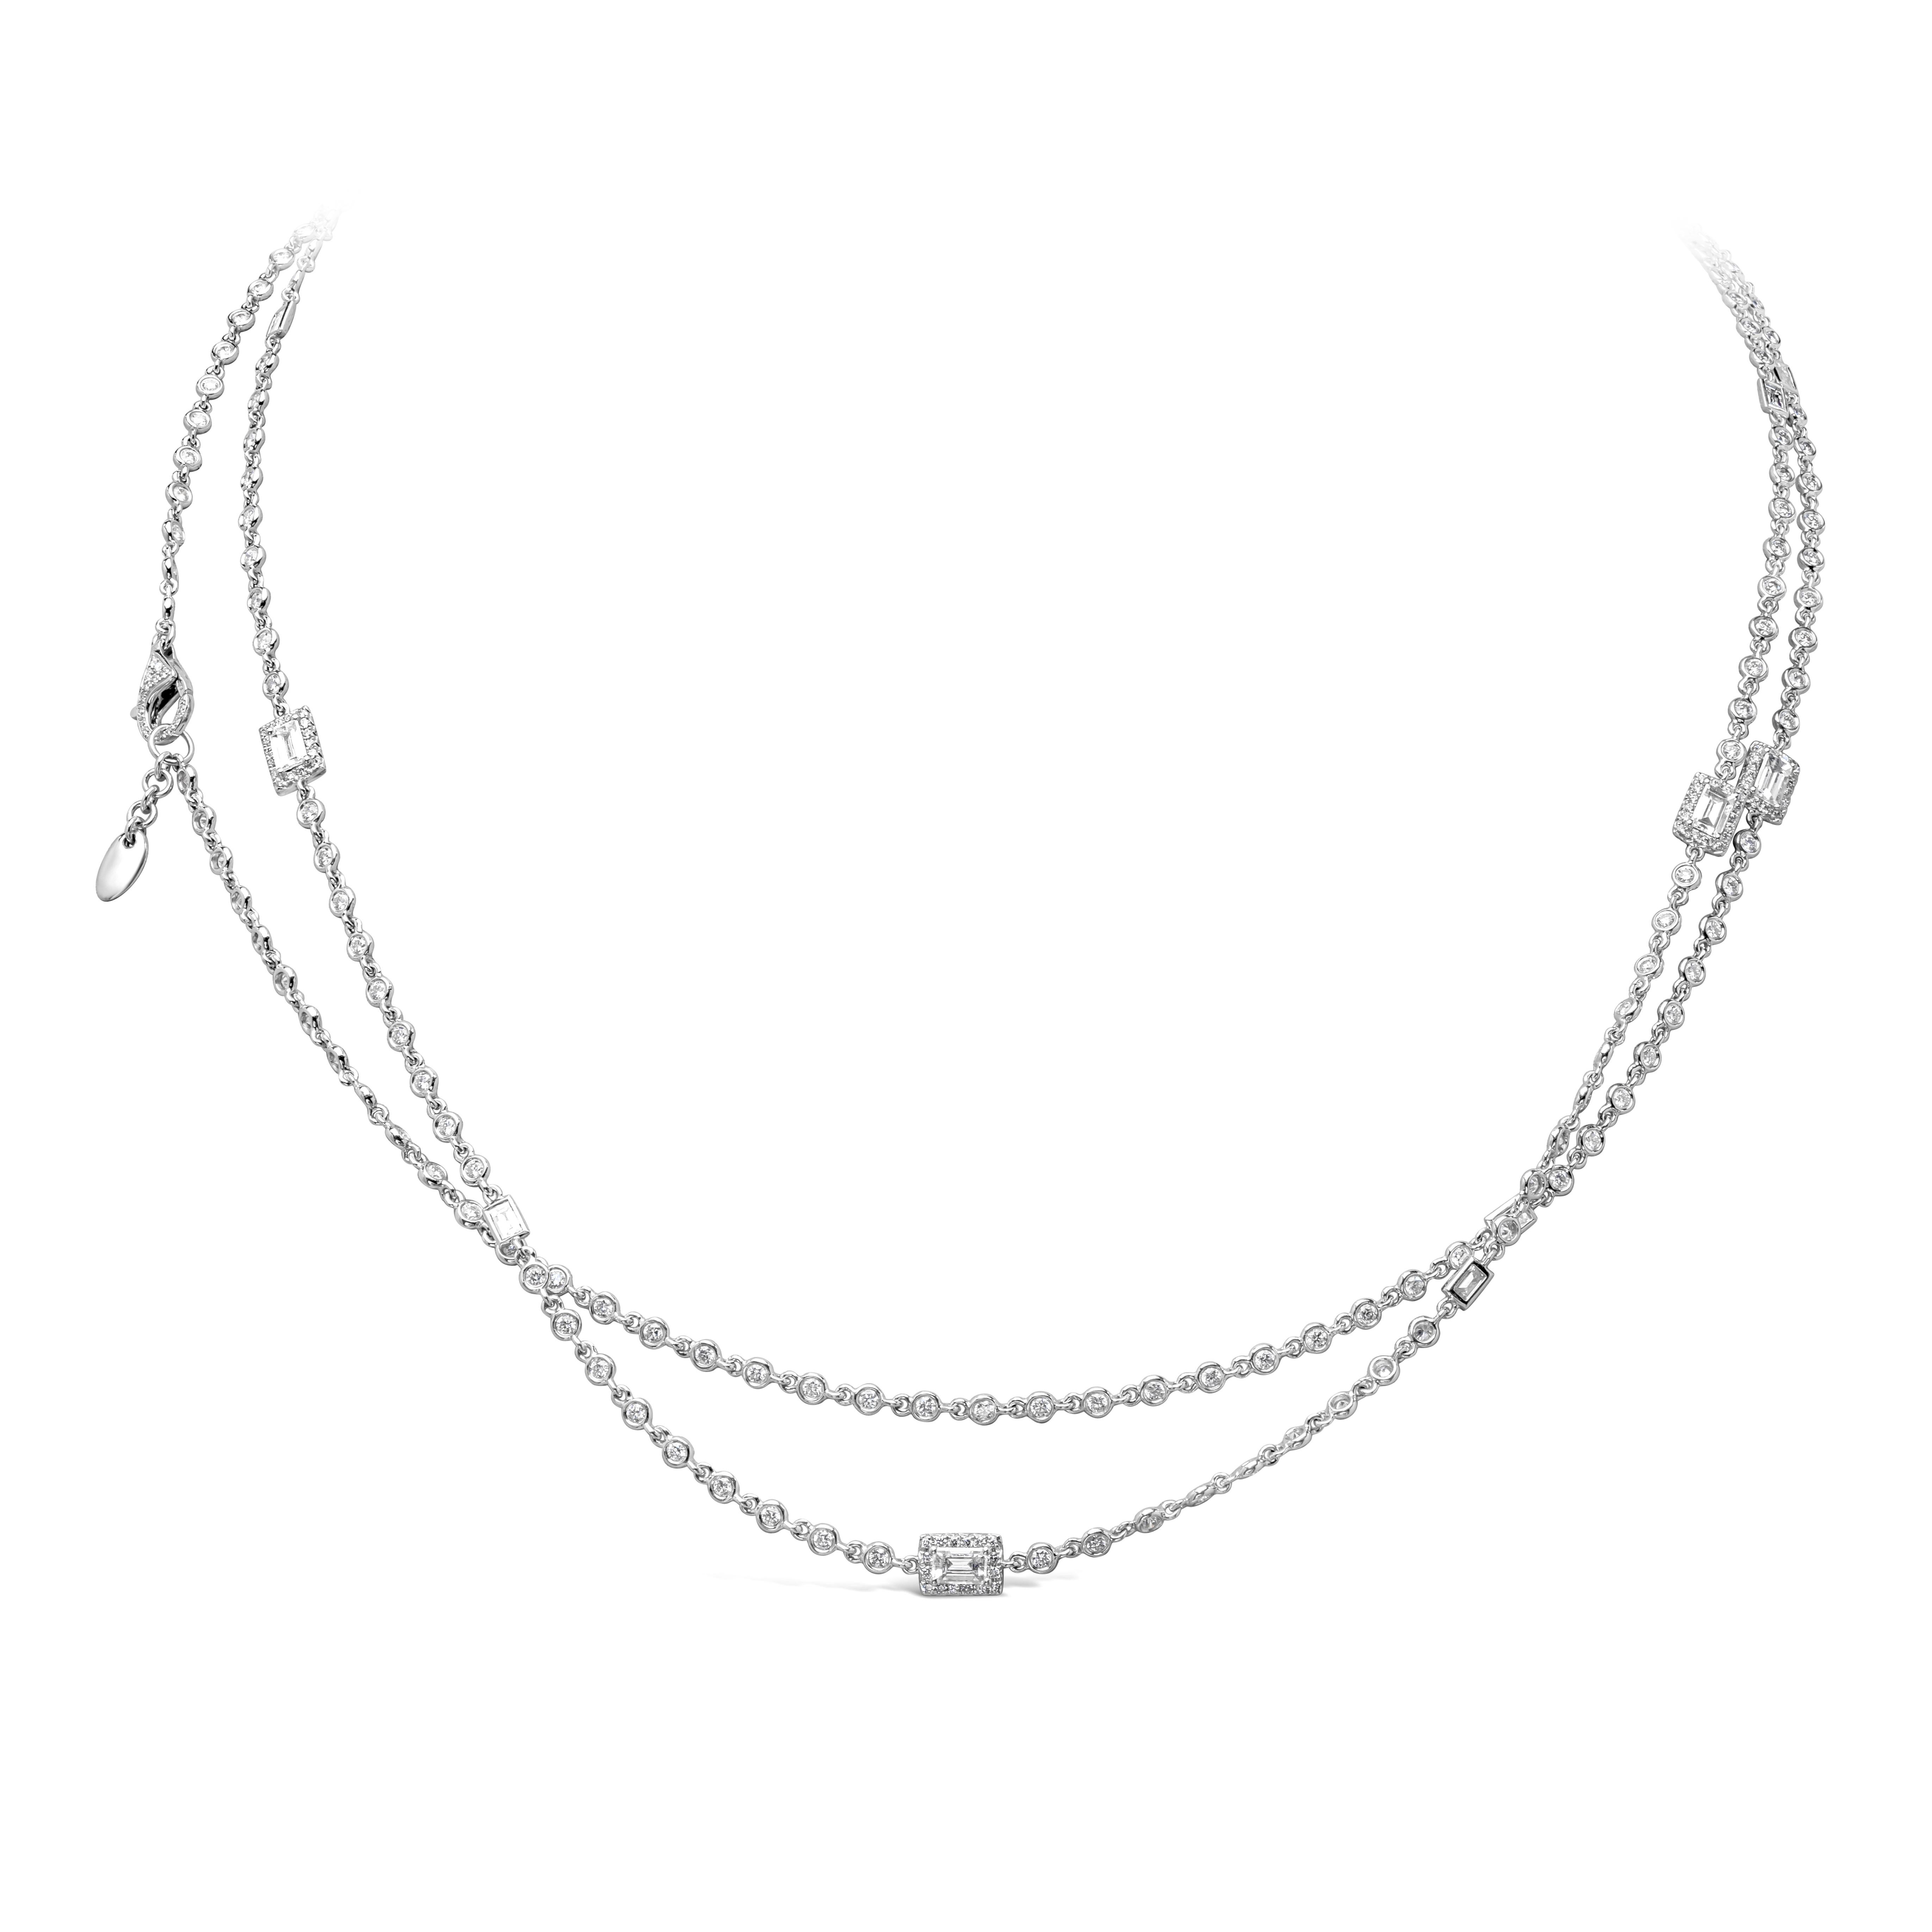 Contemporary 6.54 Carats Total Baguette and Round Cut Diamonds by the Yard Line Necklace For Sale